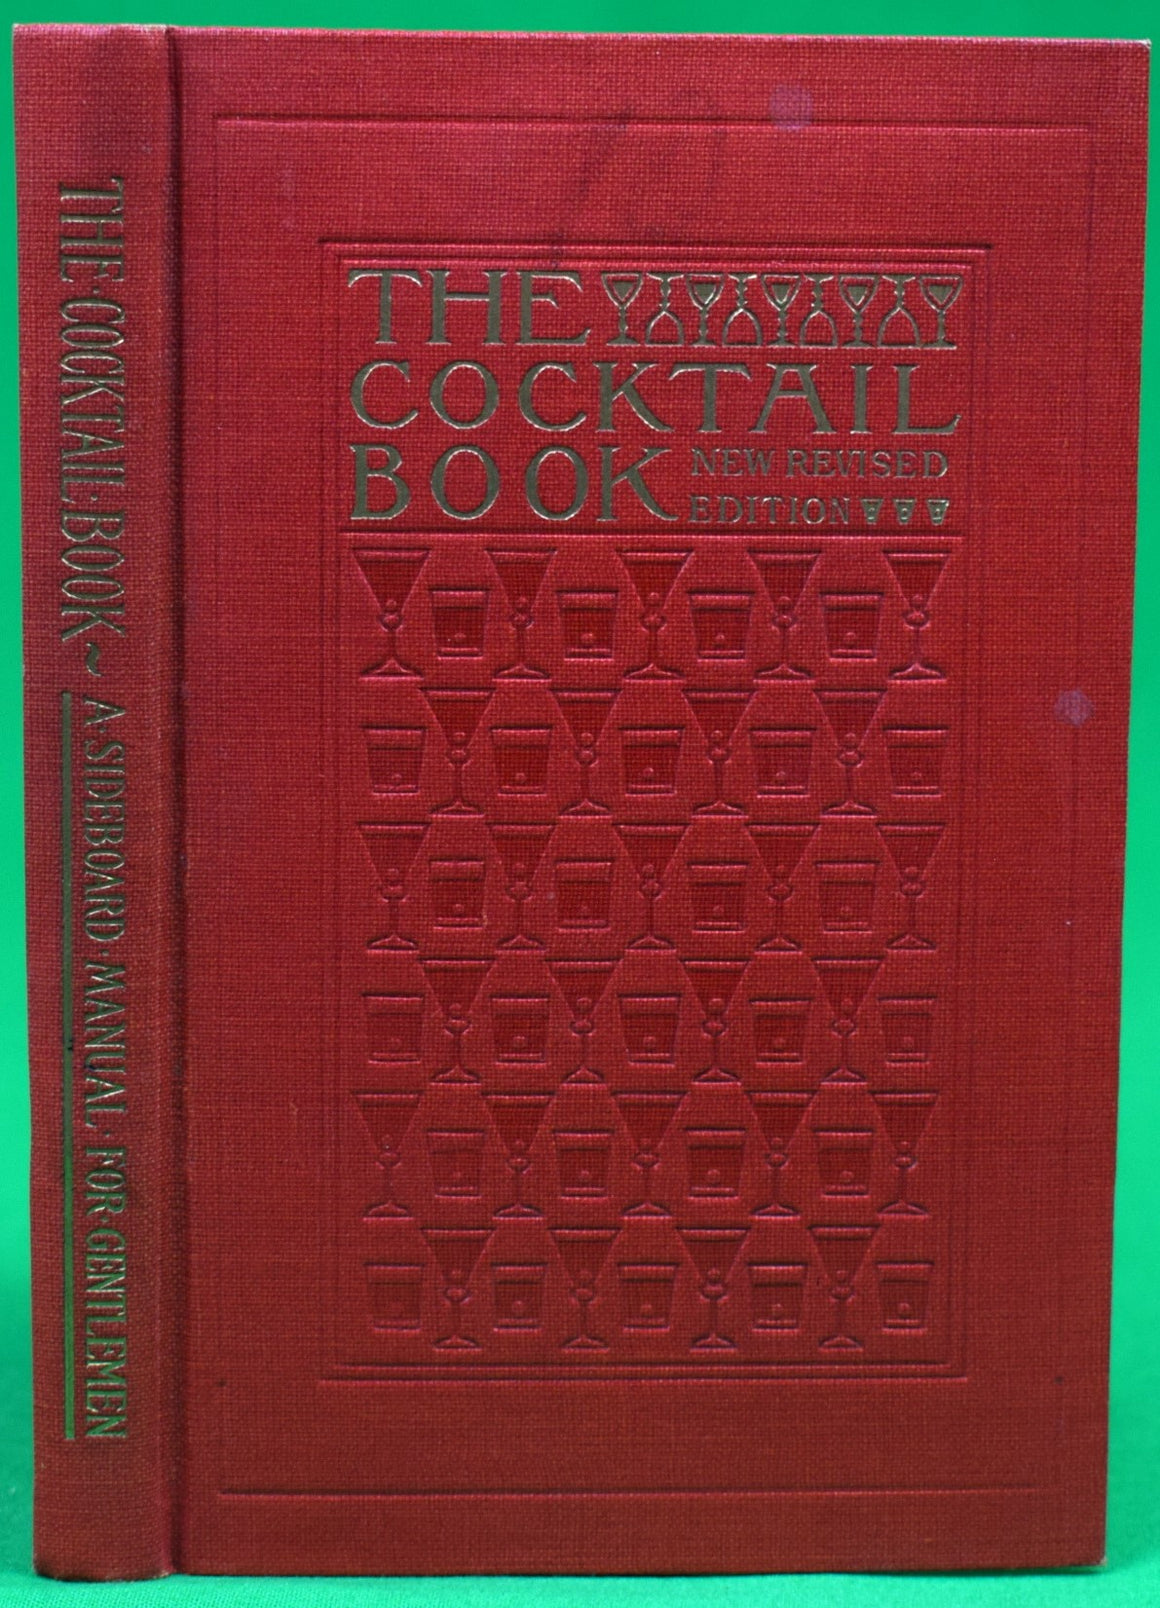 "The Cocktail Book A Sideboard Manual For Gentlemen" 1913 KNOWLES, Frederic Lawrence